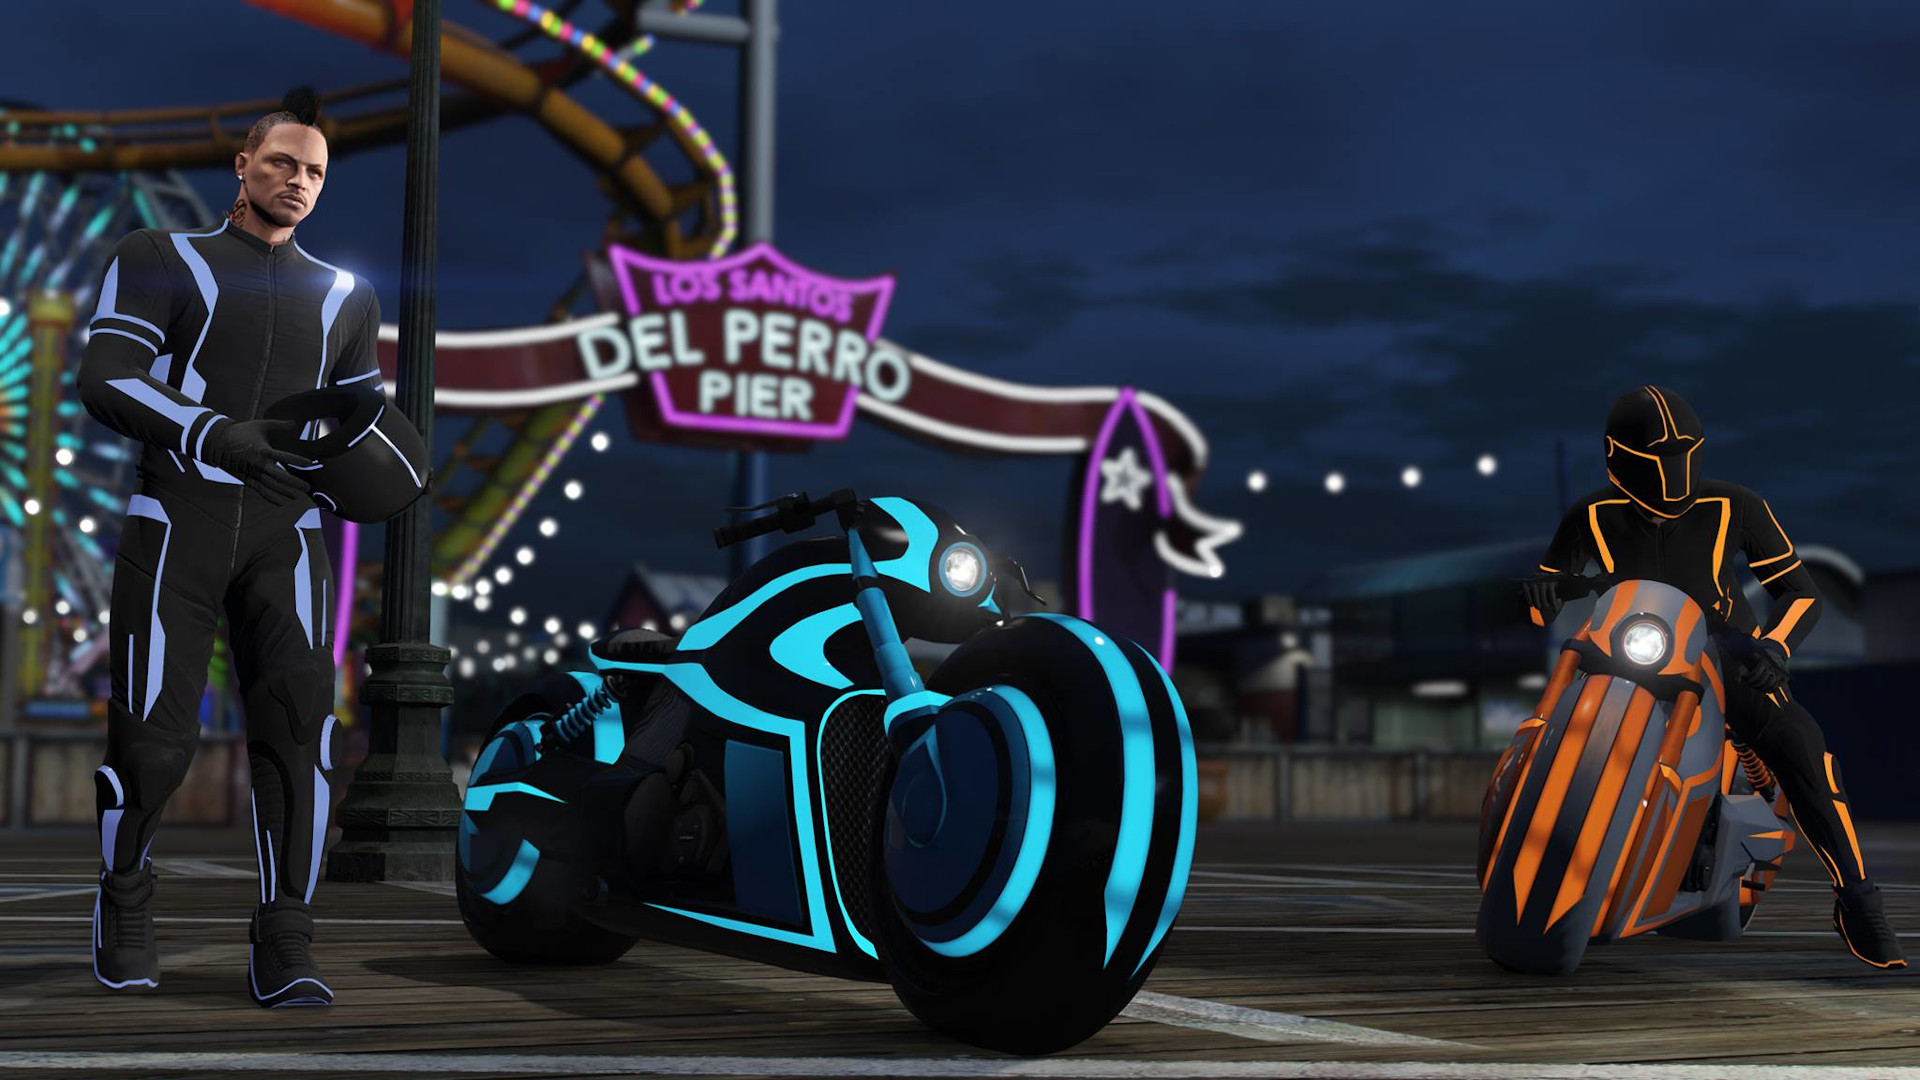 GTA Online fastest bikes: A player standing next to a blue Tron-like motorbike on the pier, with another player sat on an orange bike just behind.